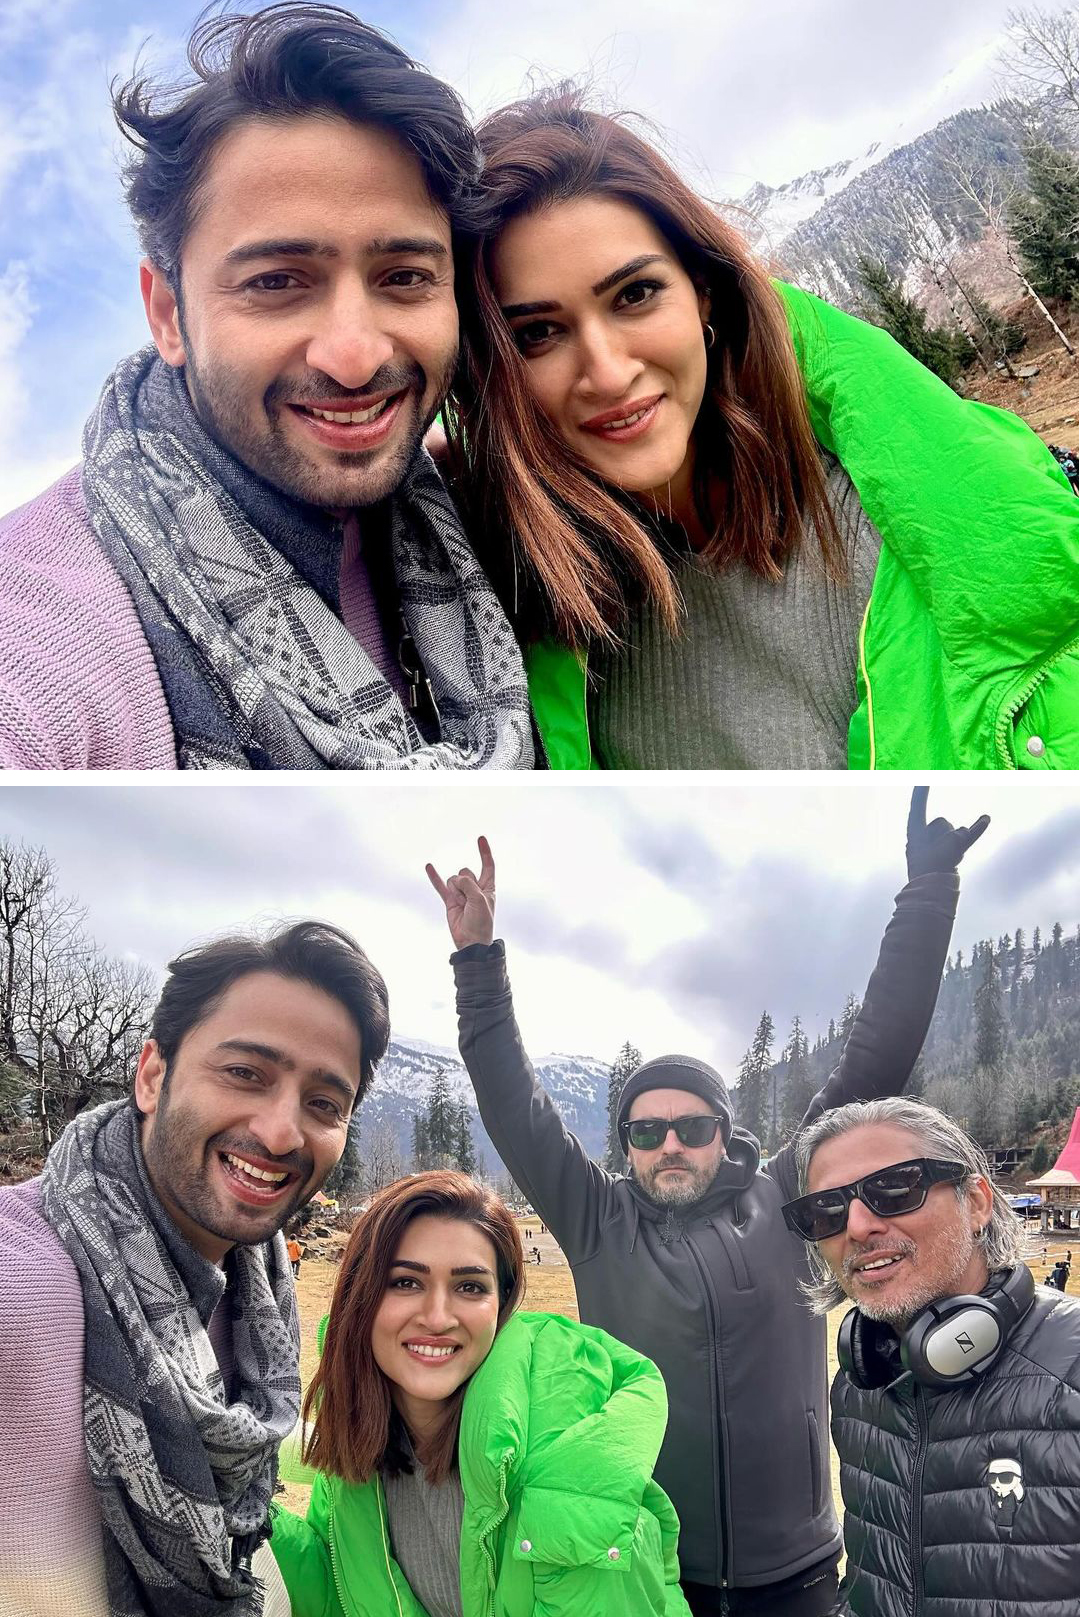 TV Heartthrob Shaheer Sheikh Shares BTS Pictures And Videos With Gorgeous Actress Kriti Sanon From Their Upcoming Bollywood Movie! Snaps Goes Viral On The Internet. 